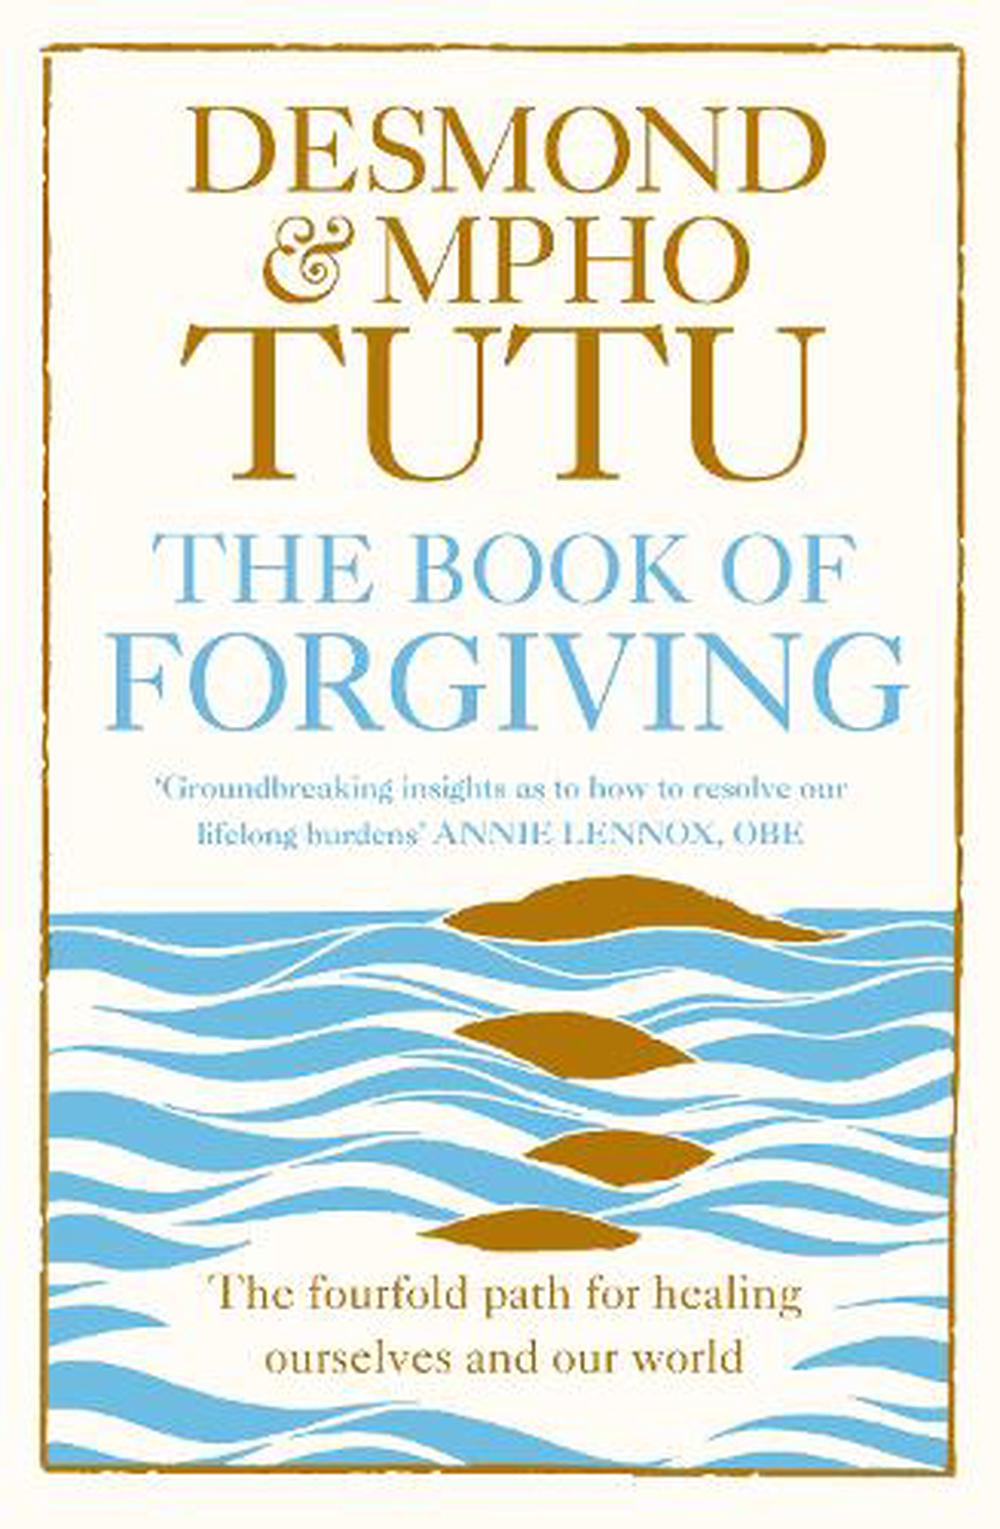 Forgiving　online　Tutu,　Paperback,　by　The　Buy　of　Desmond　The　at　9780007572601　Book　Archbishop　Nile